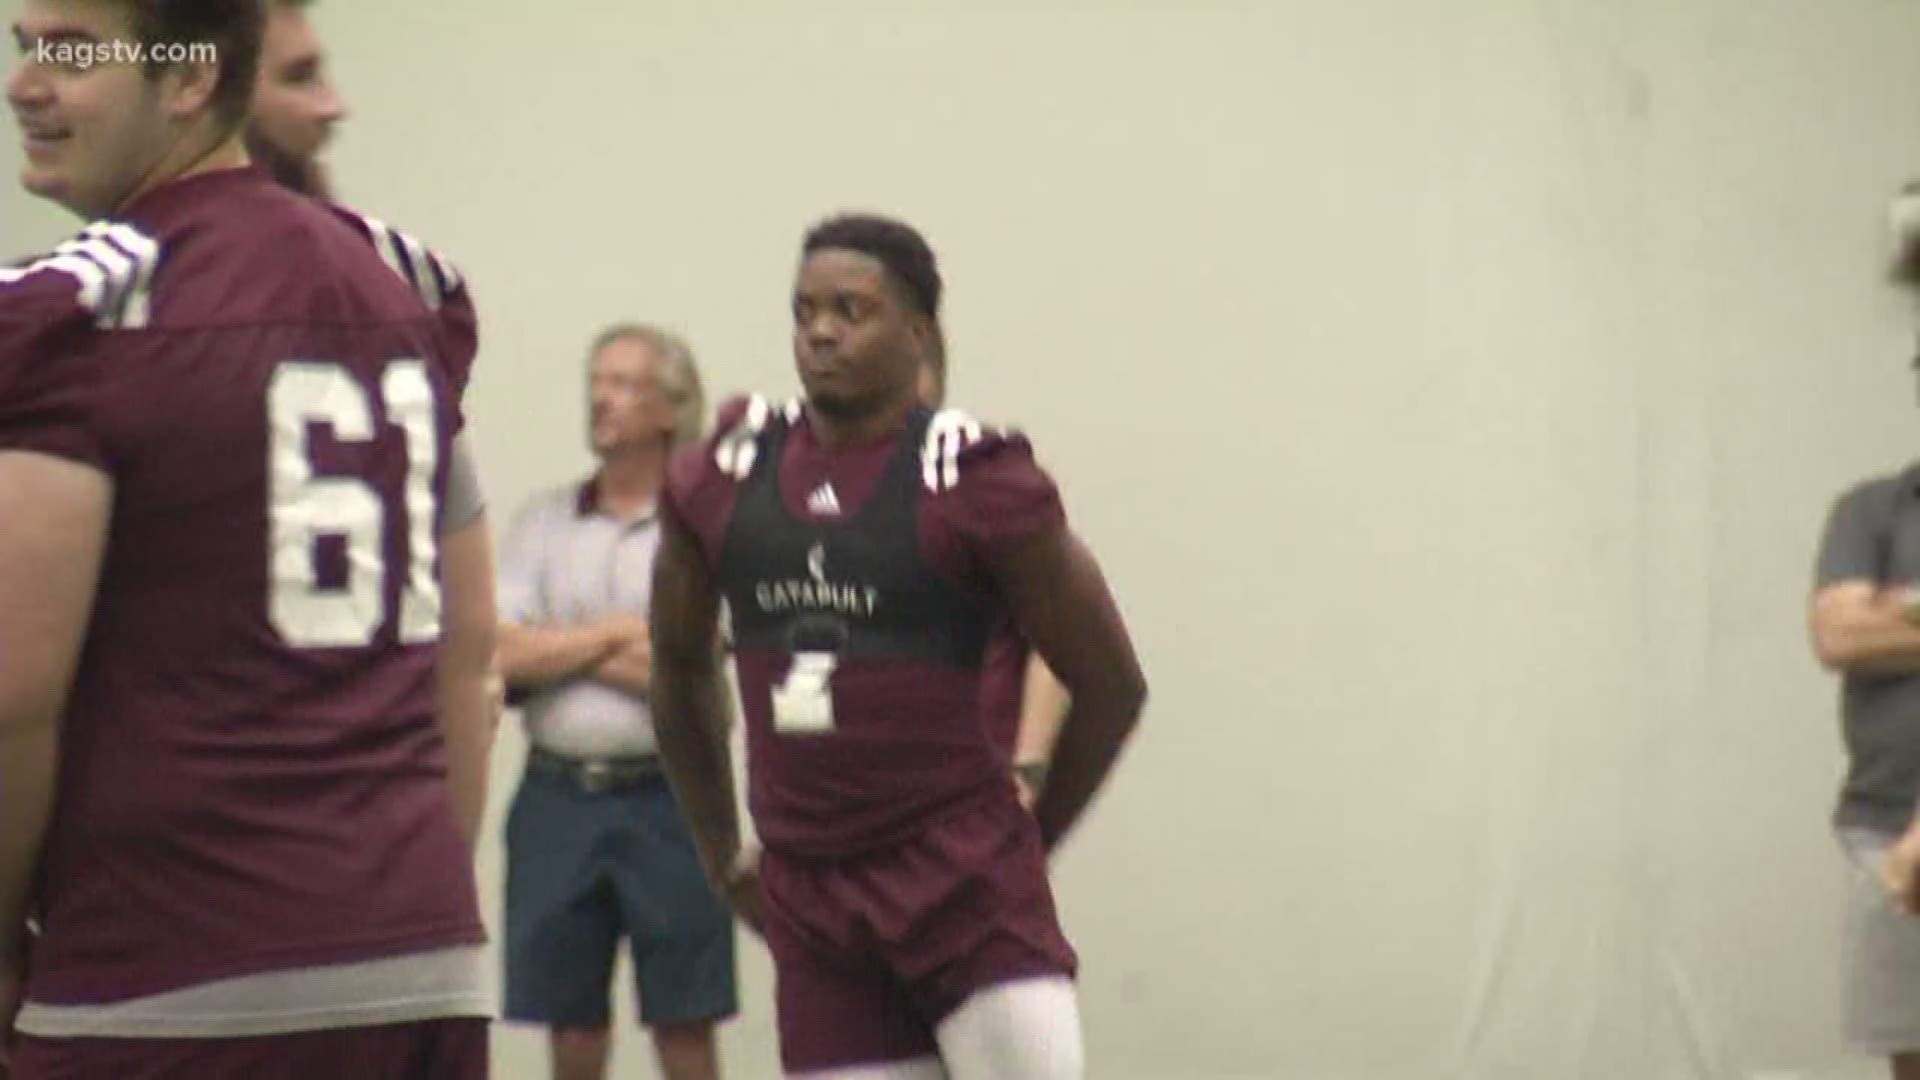 The Texas A&M football team held its final scrimmage of the spring on Wednesday. So, as you might expect, the team only had a walk-through on Thursday ahead of the Spring Game on Friday night.